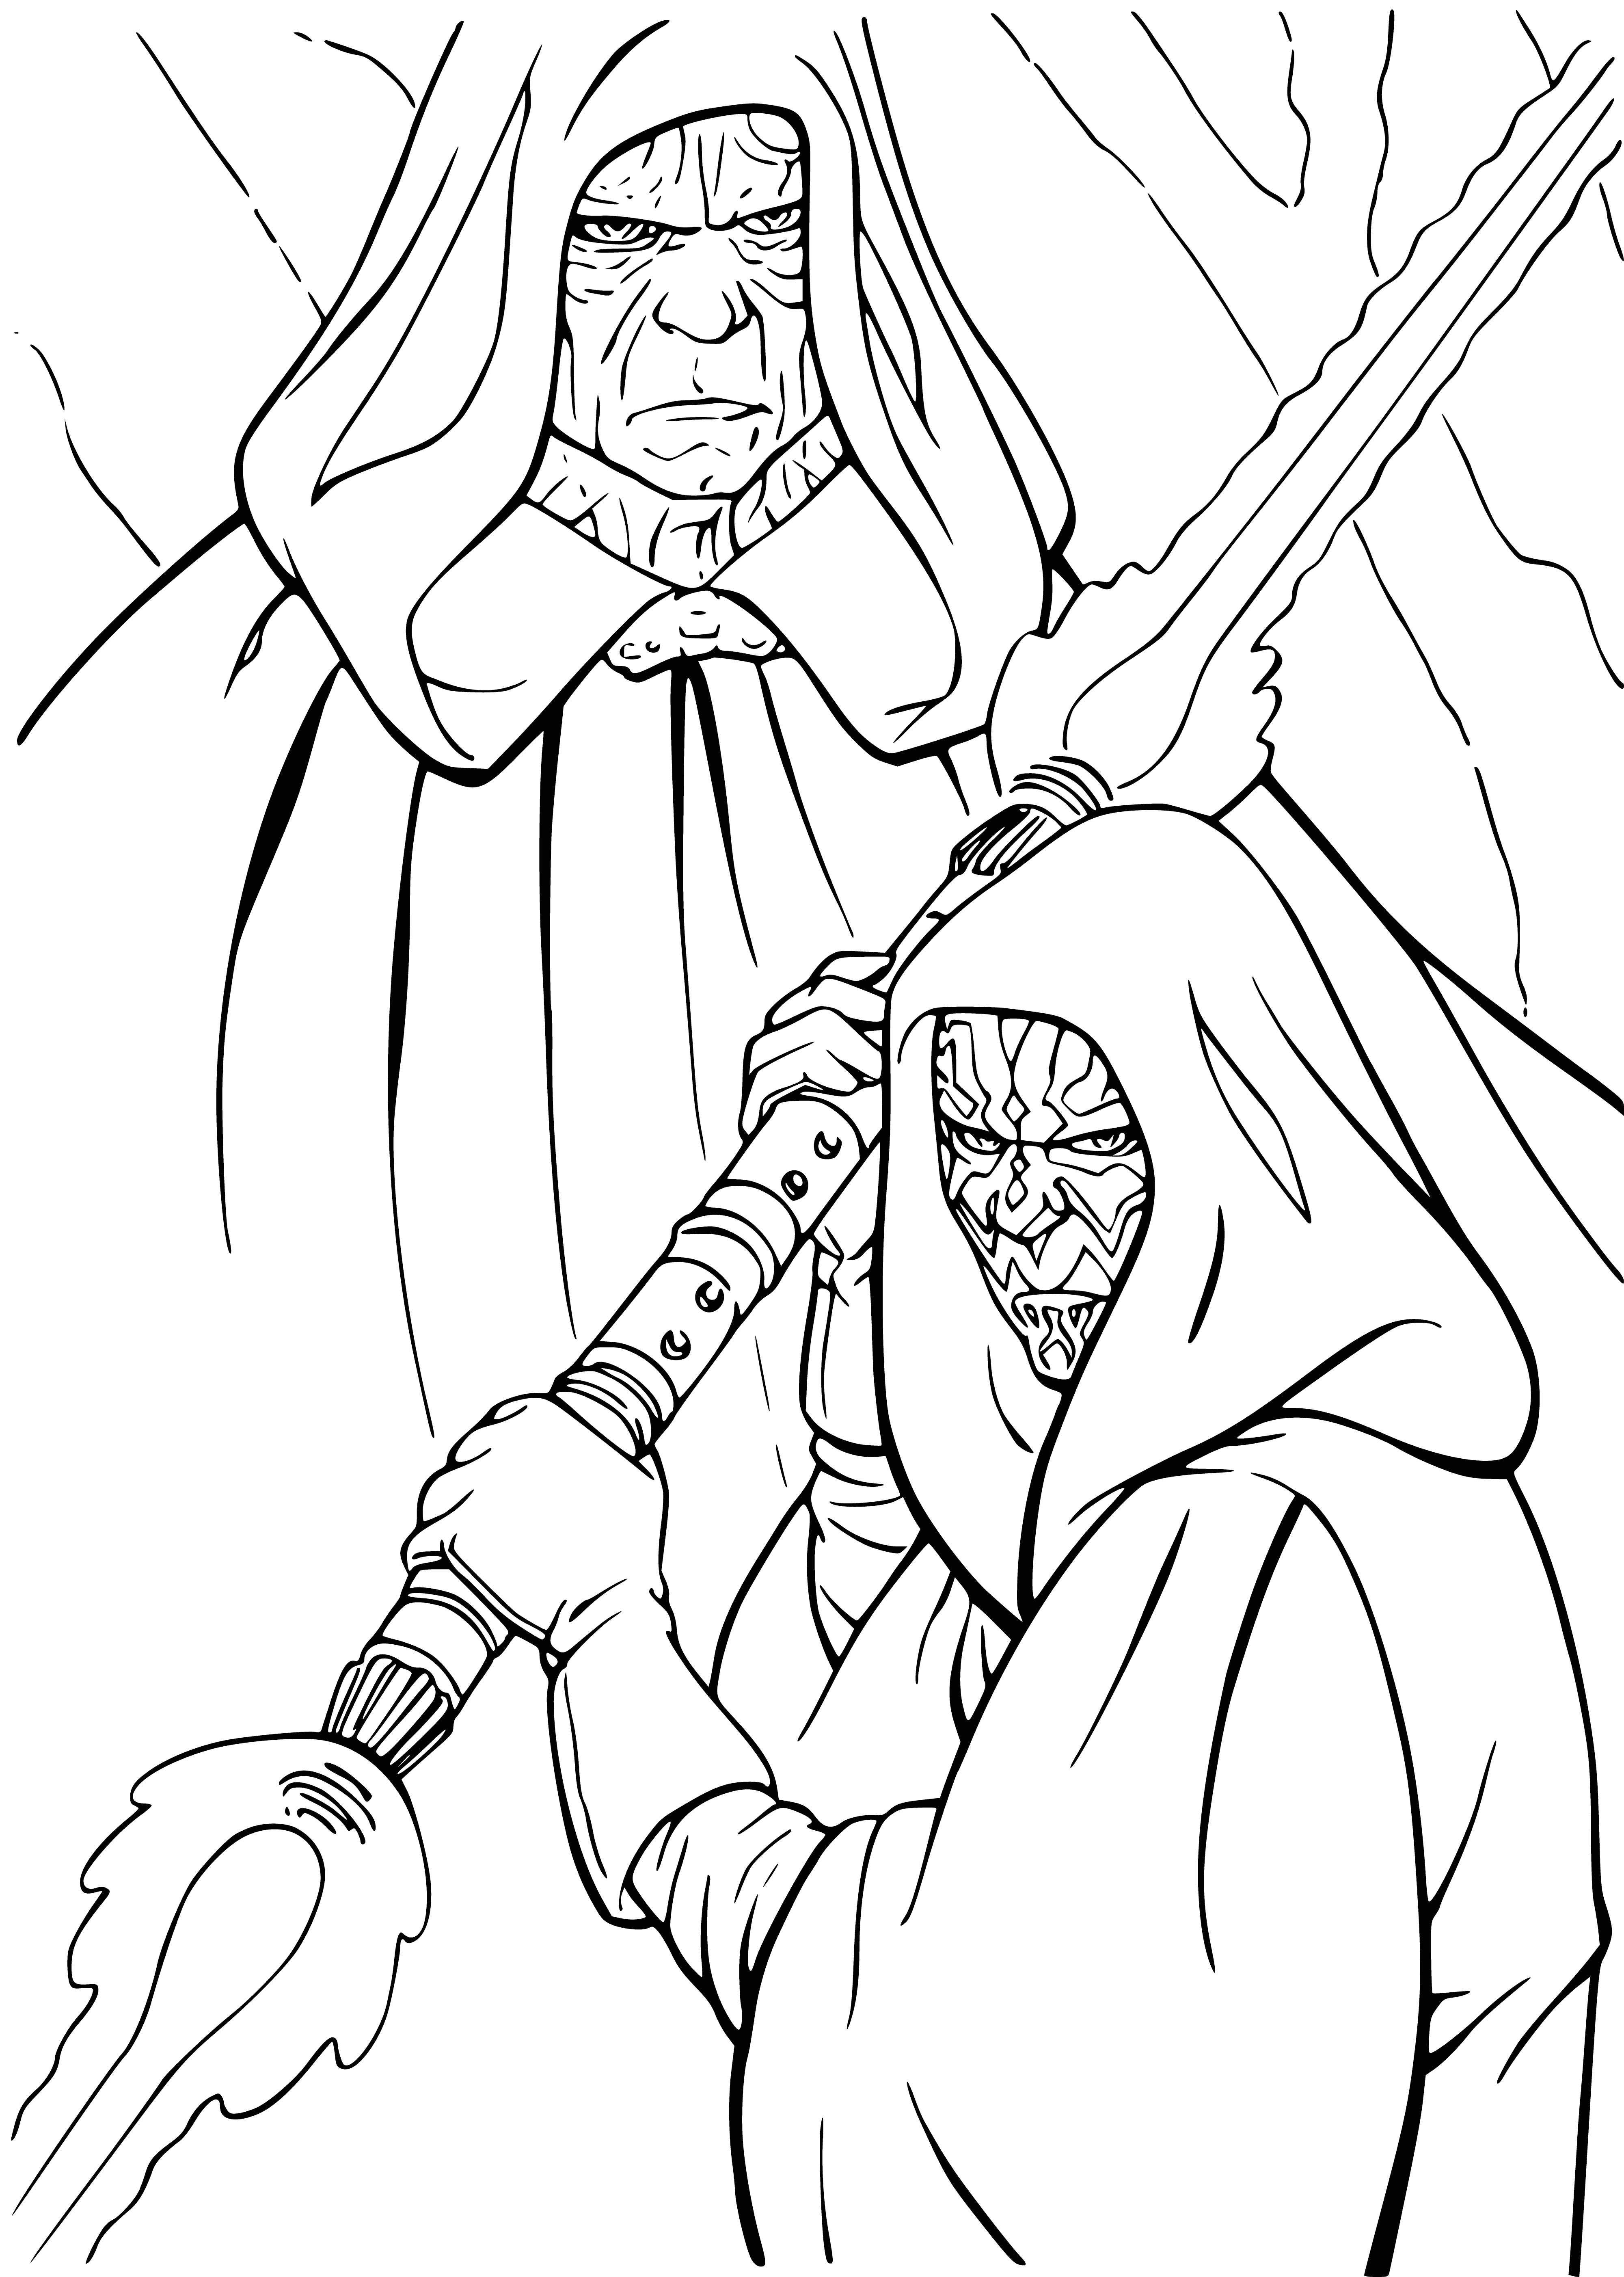 coloring page: Two mysterious figures facing an unknown force, with intense expression and mysterious eyes.